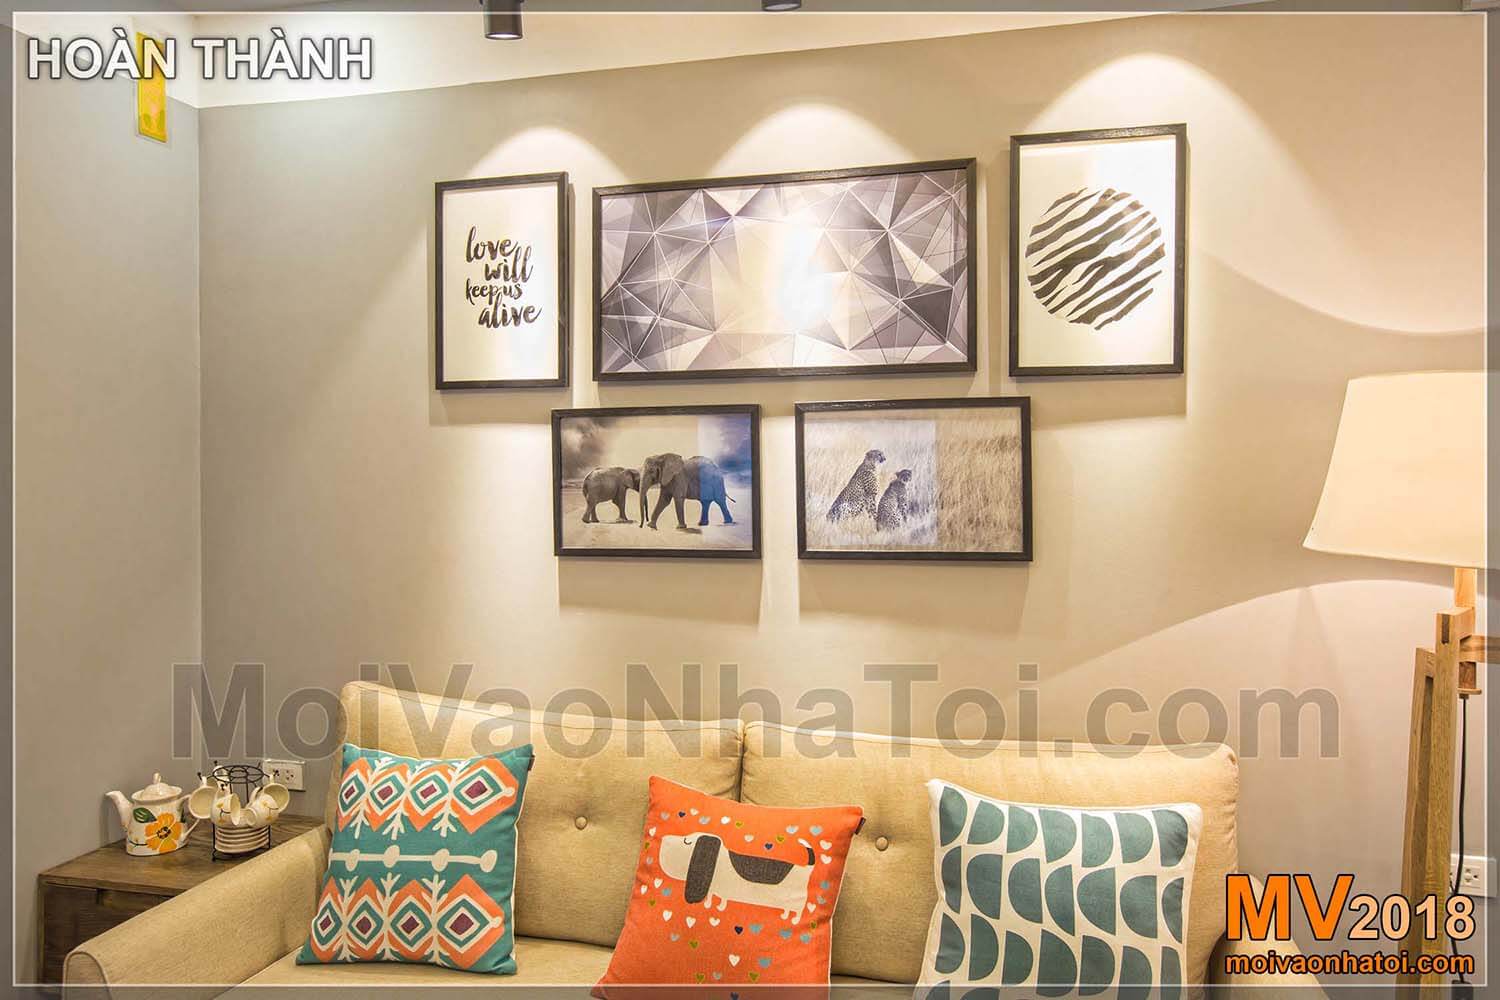 The paintings add artistic features to Dang Xa Apartment house